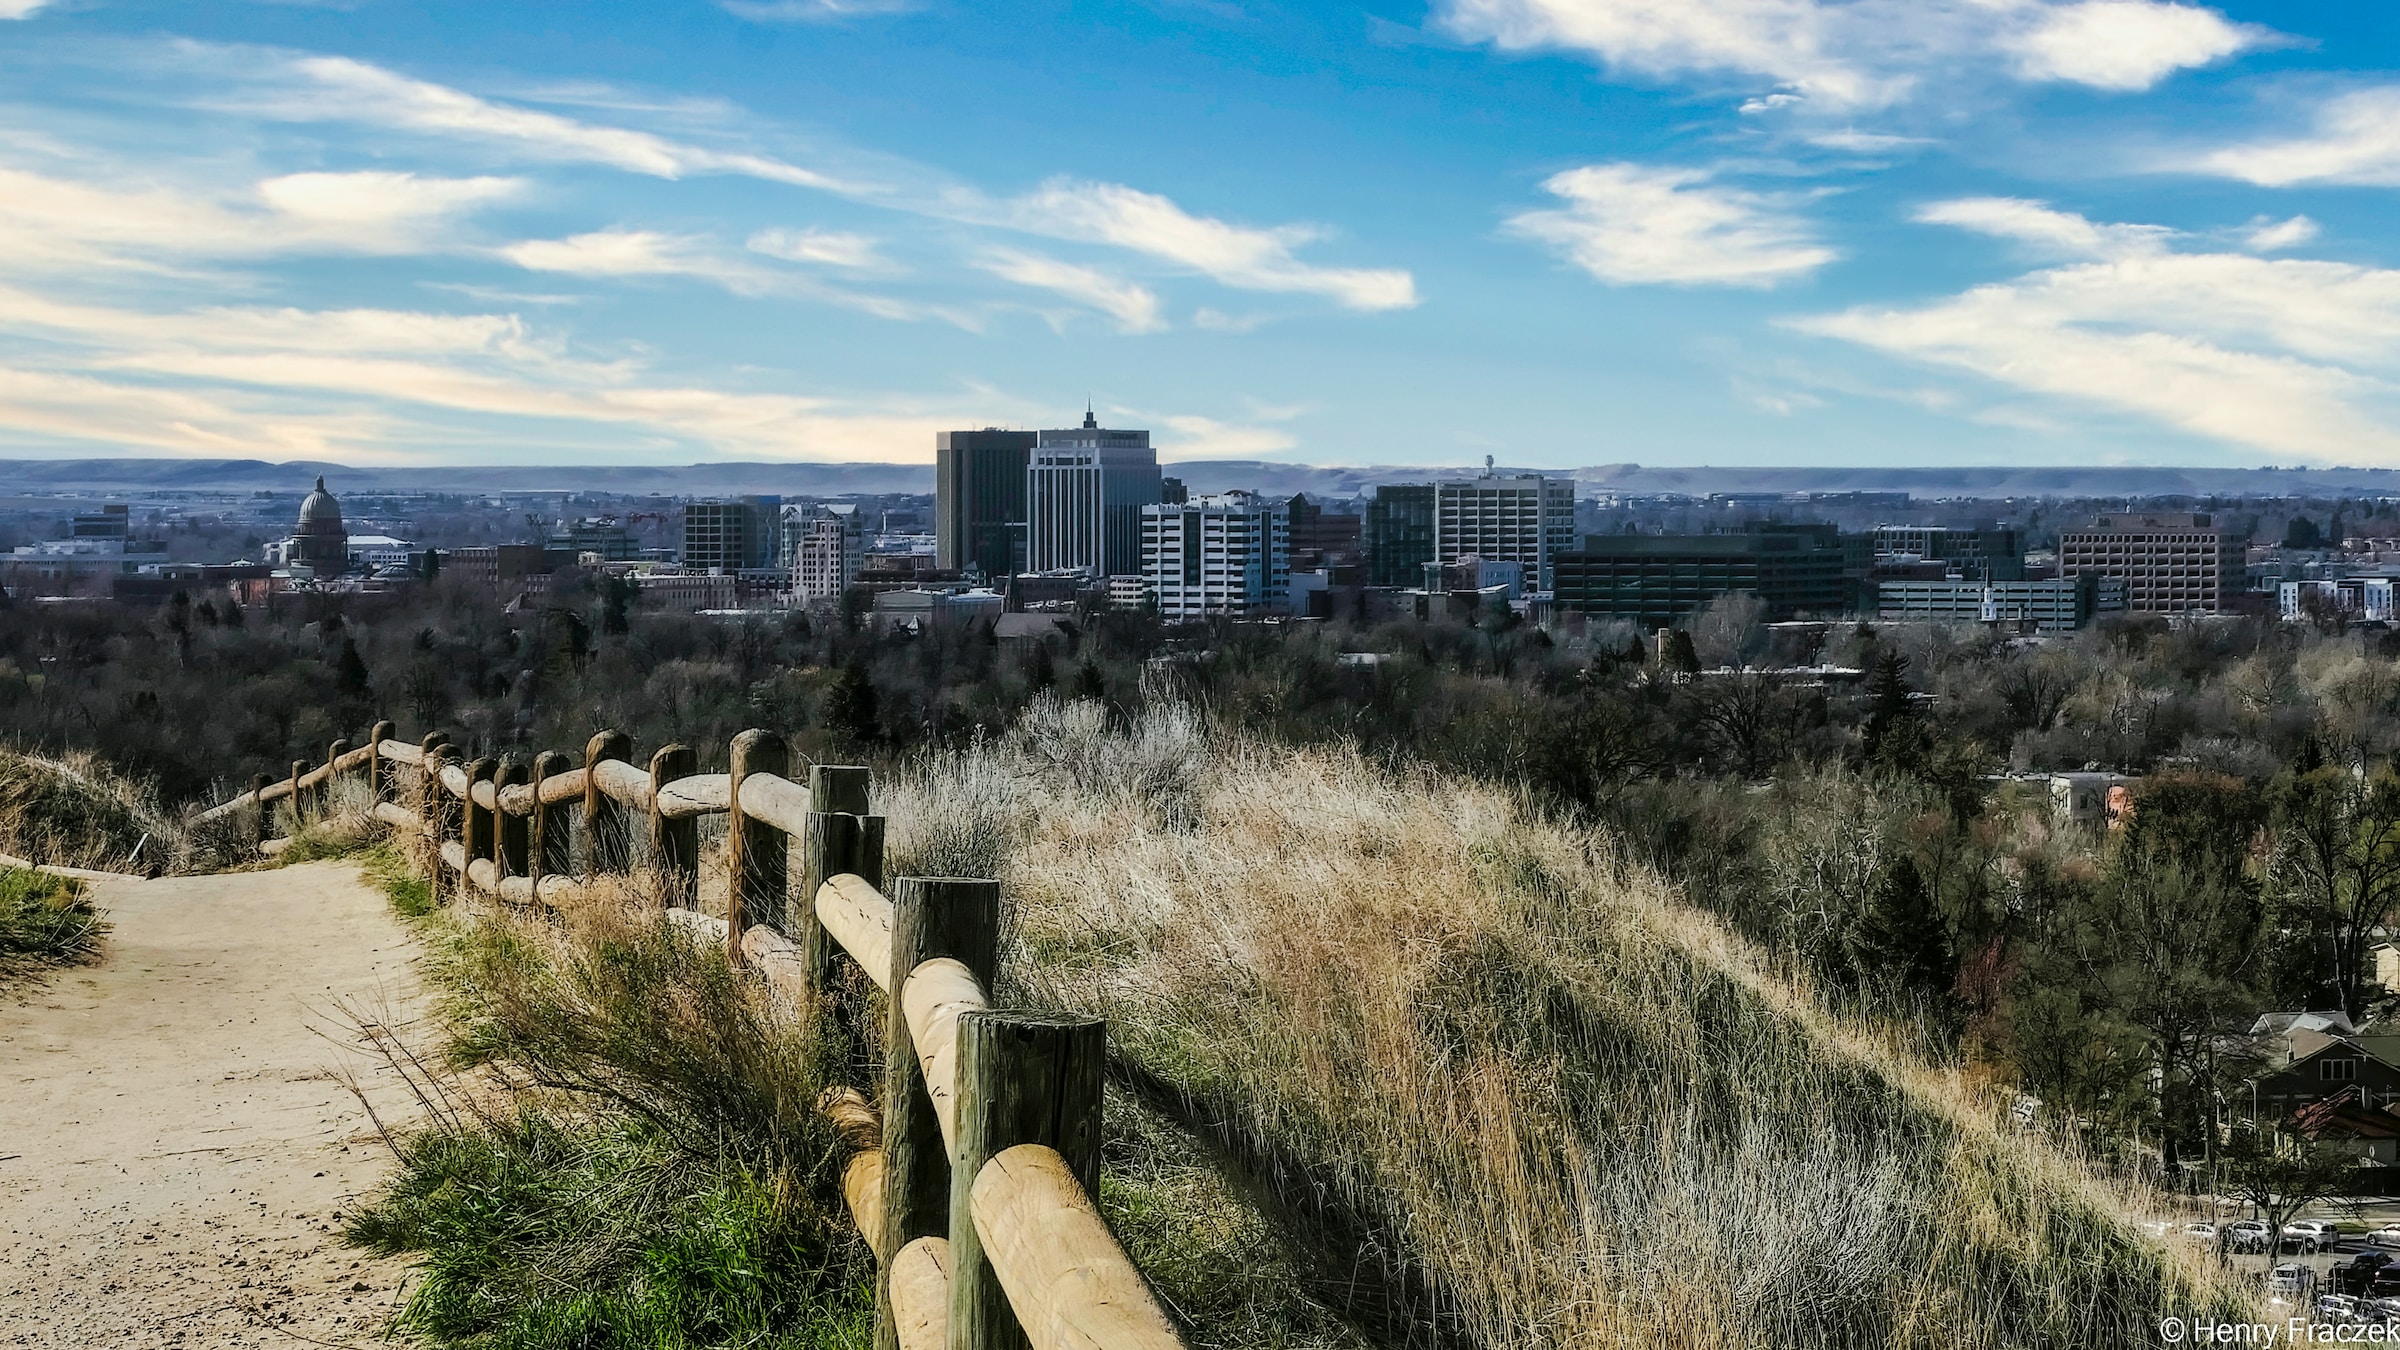 widescreen photo of Boise from high